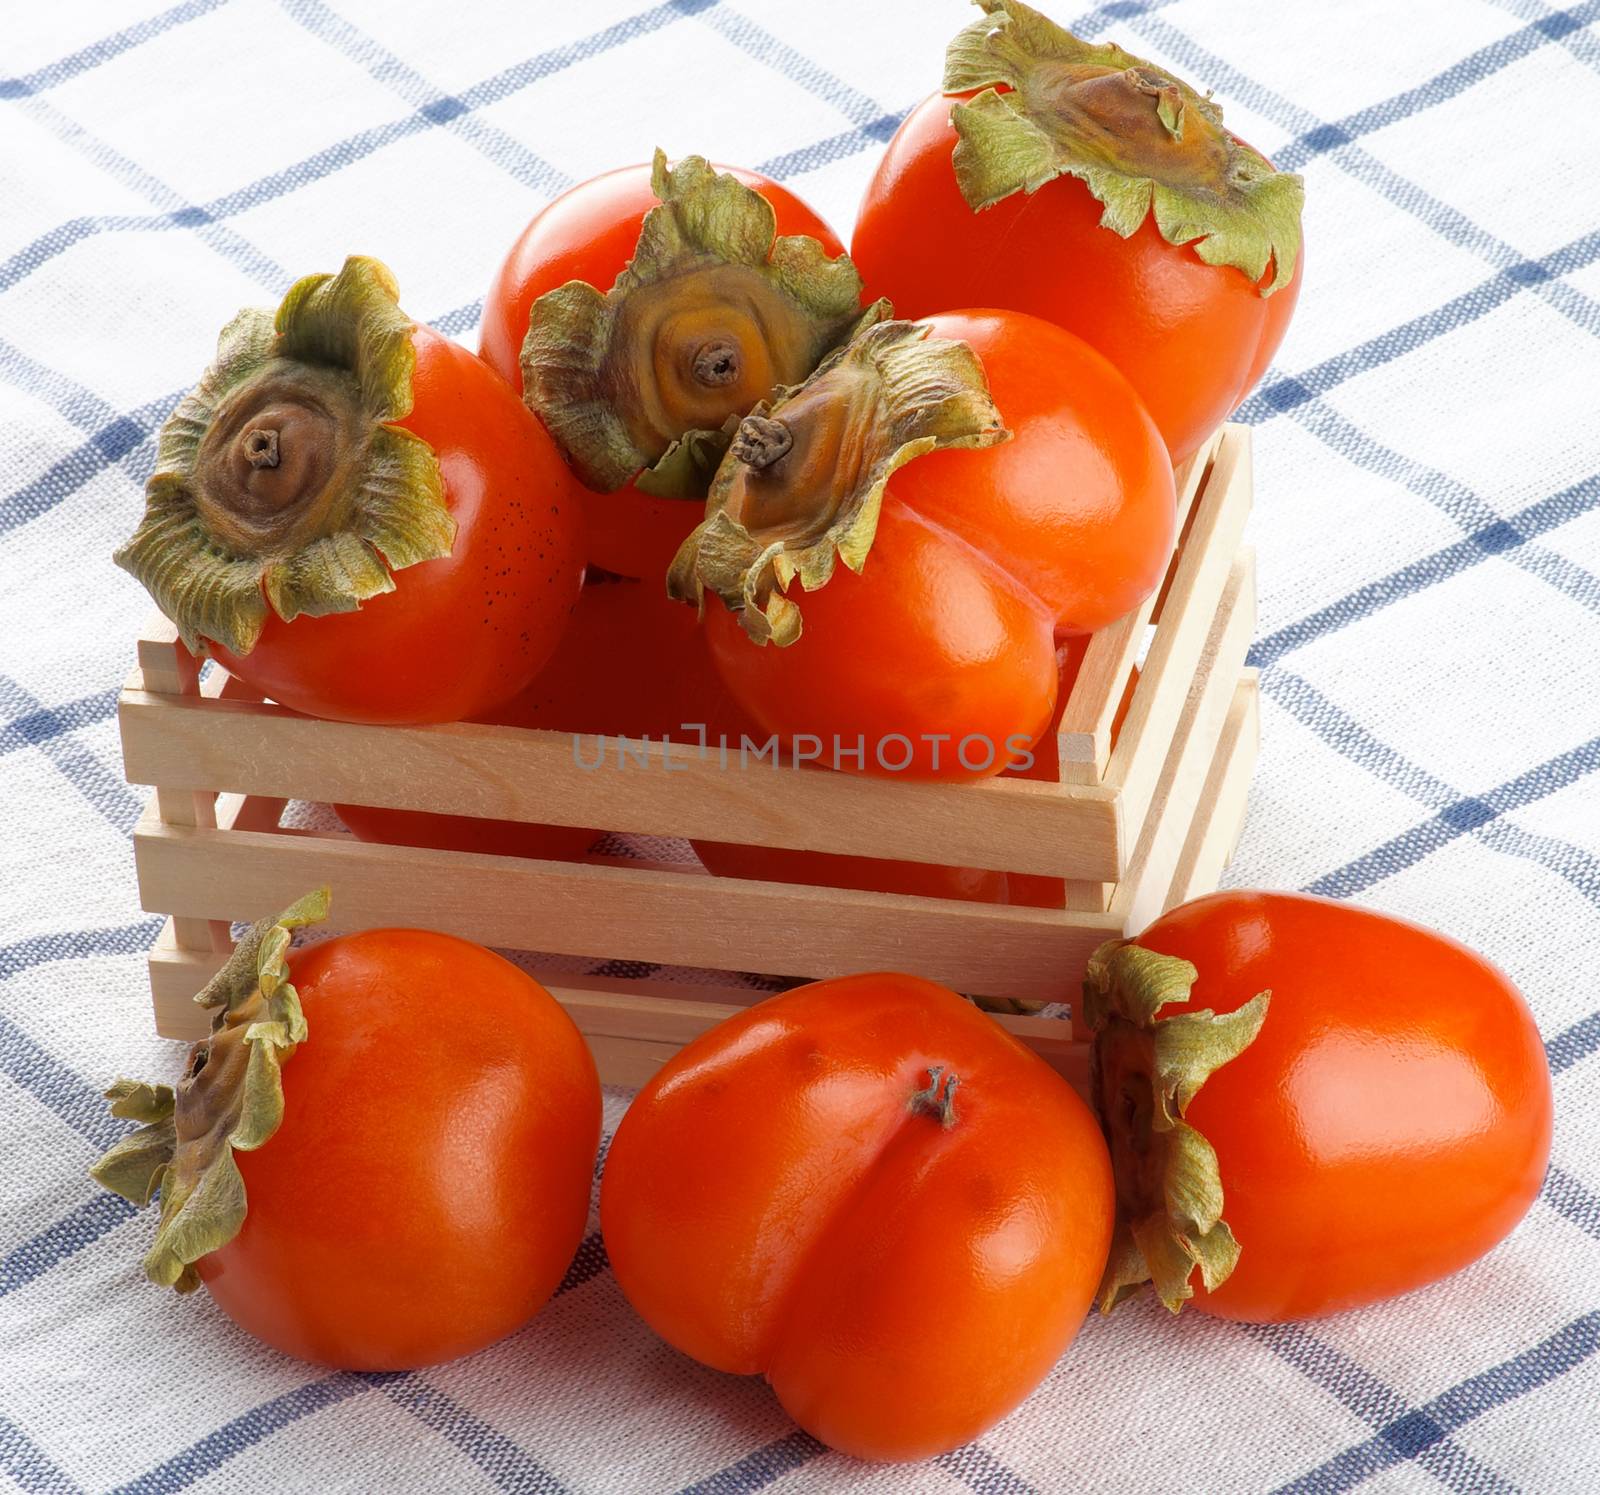 Heap of Delicious Raw Persimmon in Wooden Box closeup on Checkered Textile Napkin